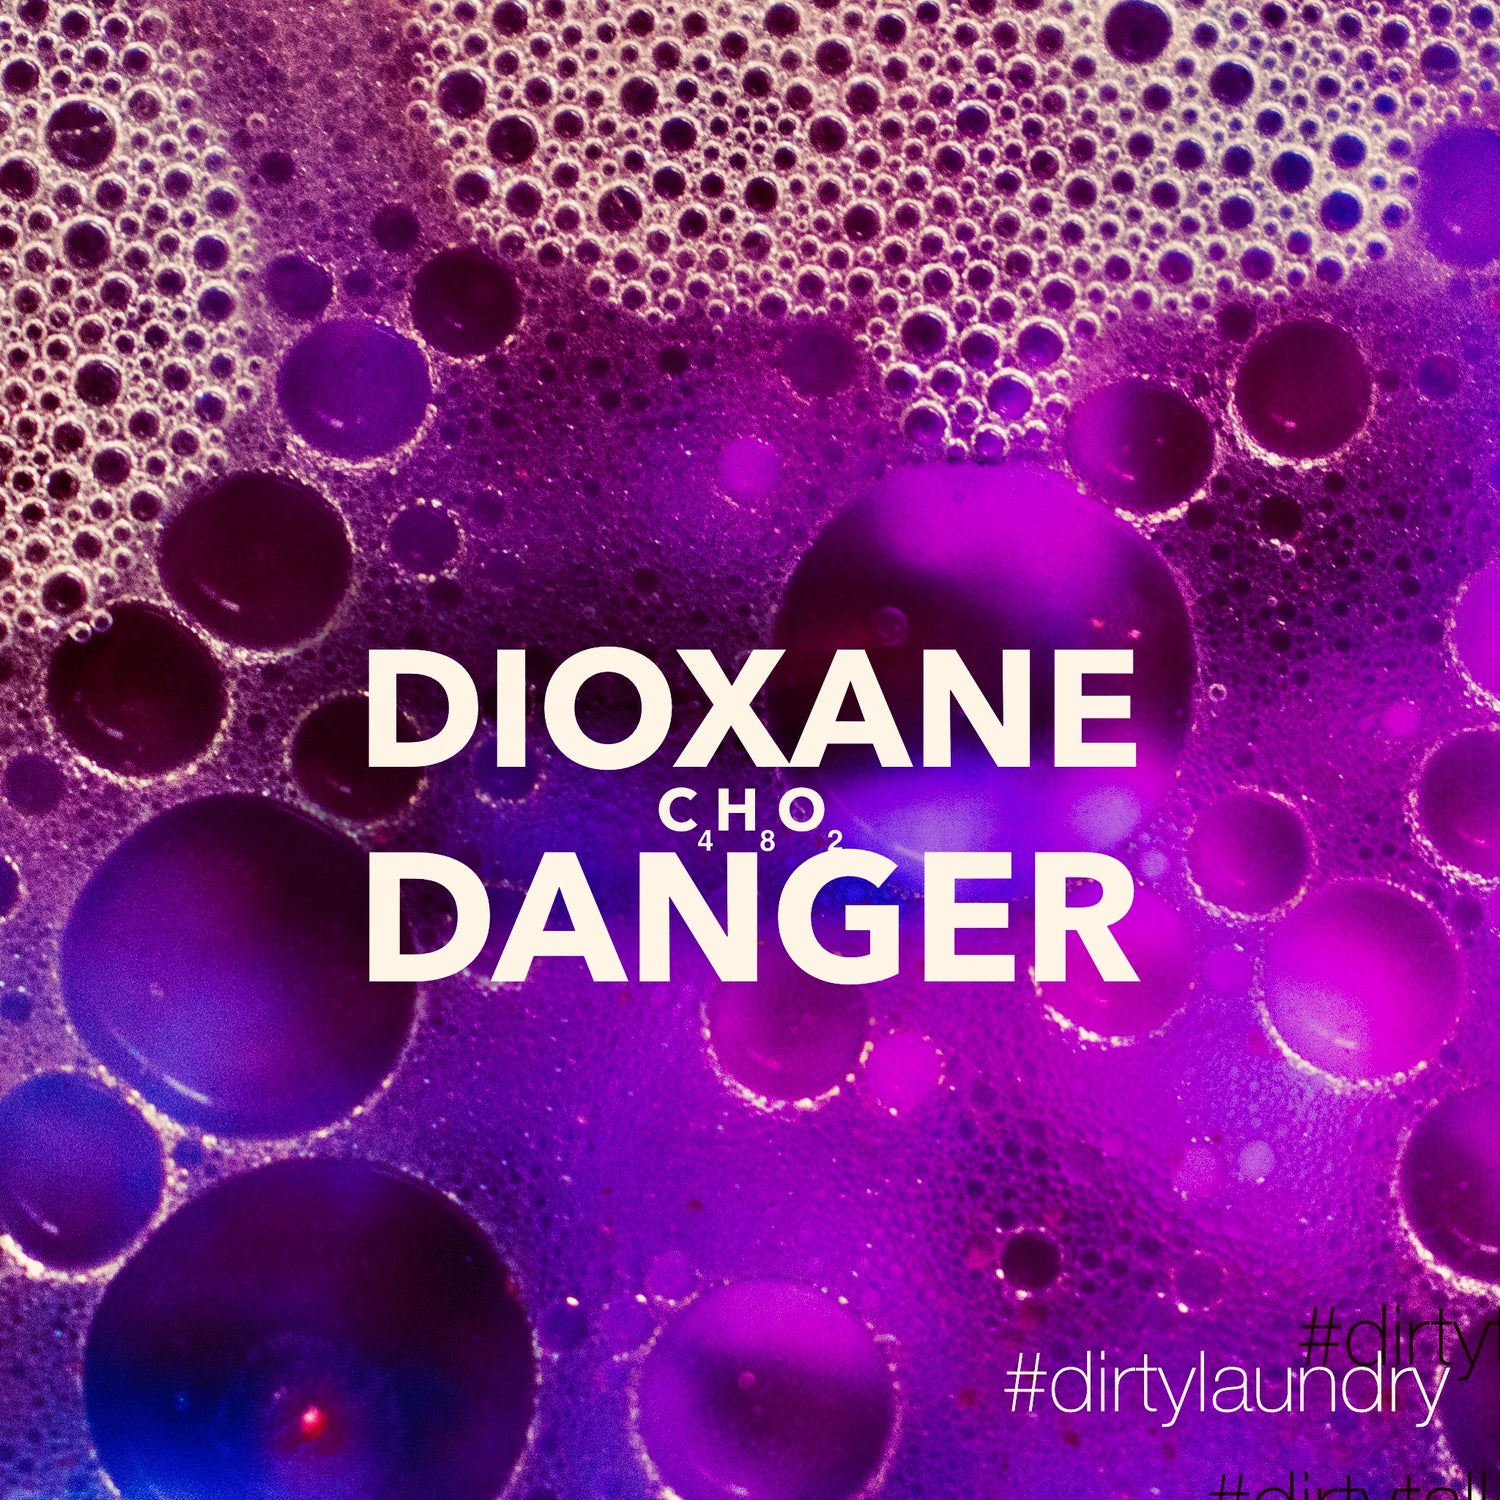 Dioxane Danger - What You Should Know!